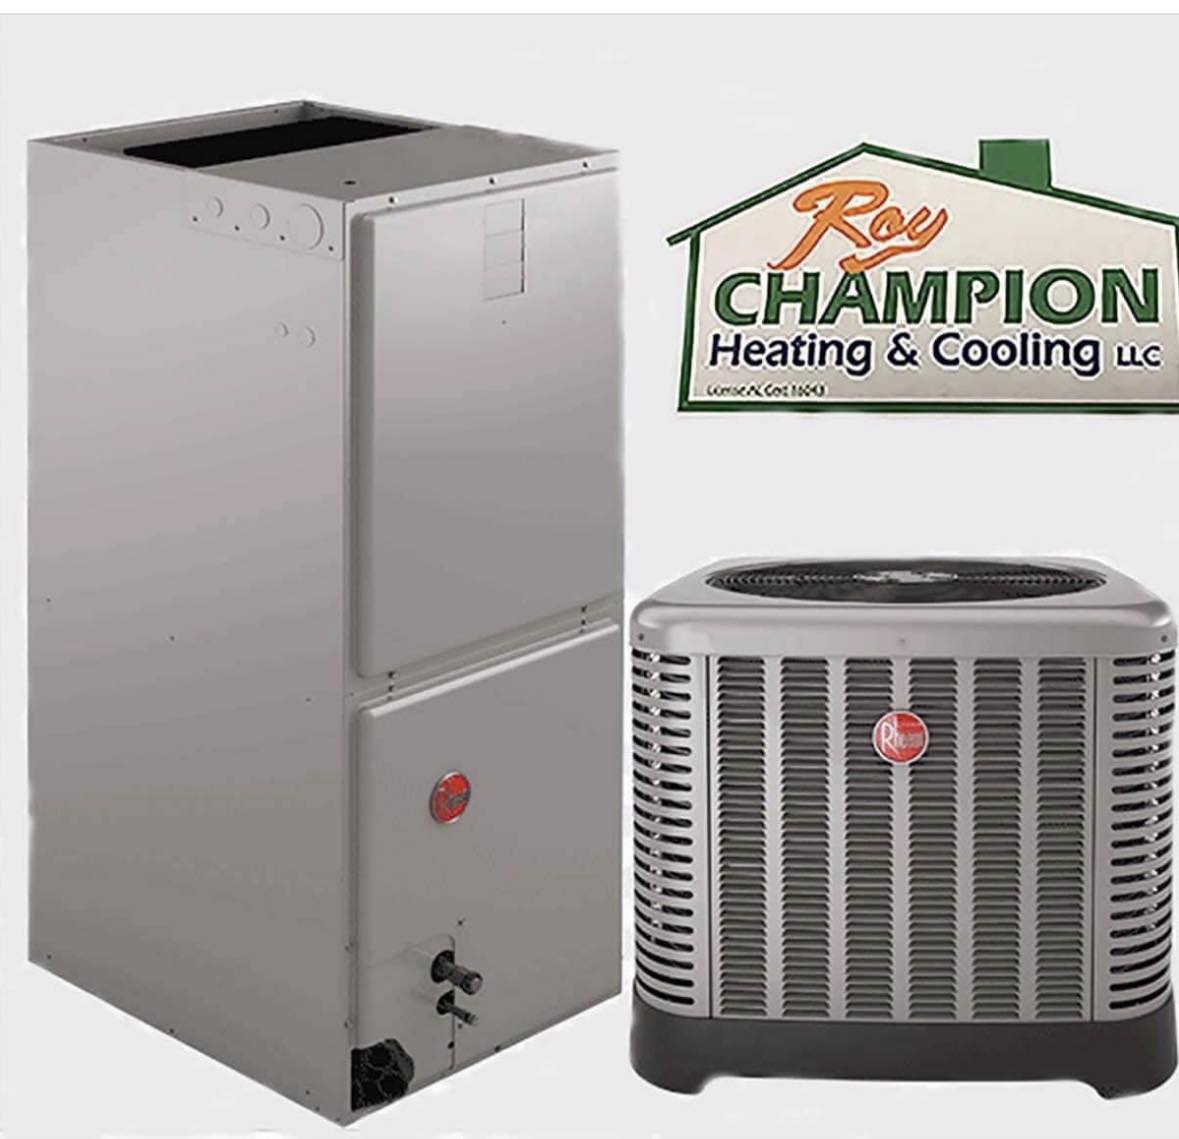 Roy Champion Heating & Cooling 6300 Hwy 36 E, Somerville Alabama 35670